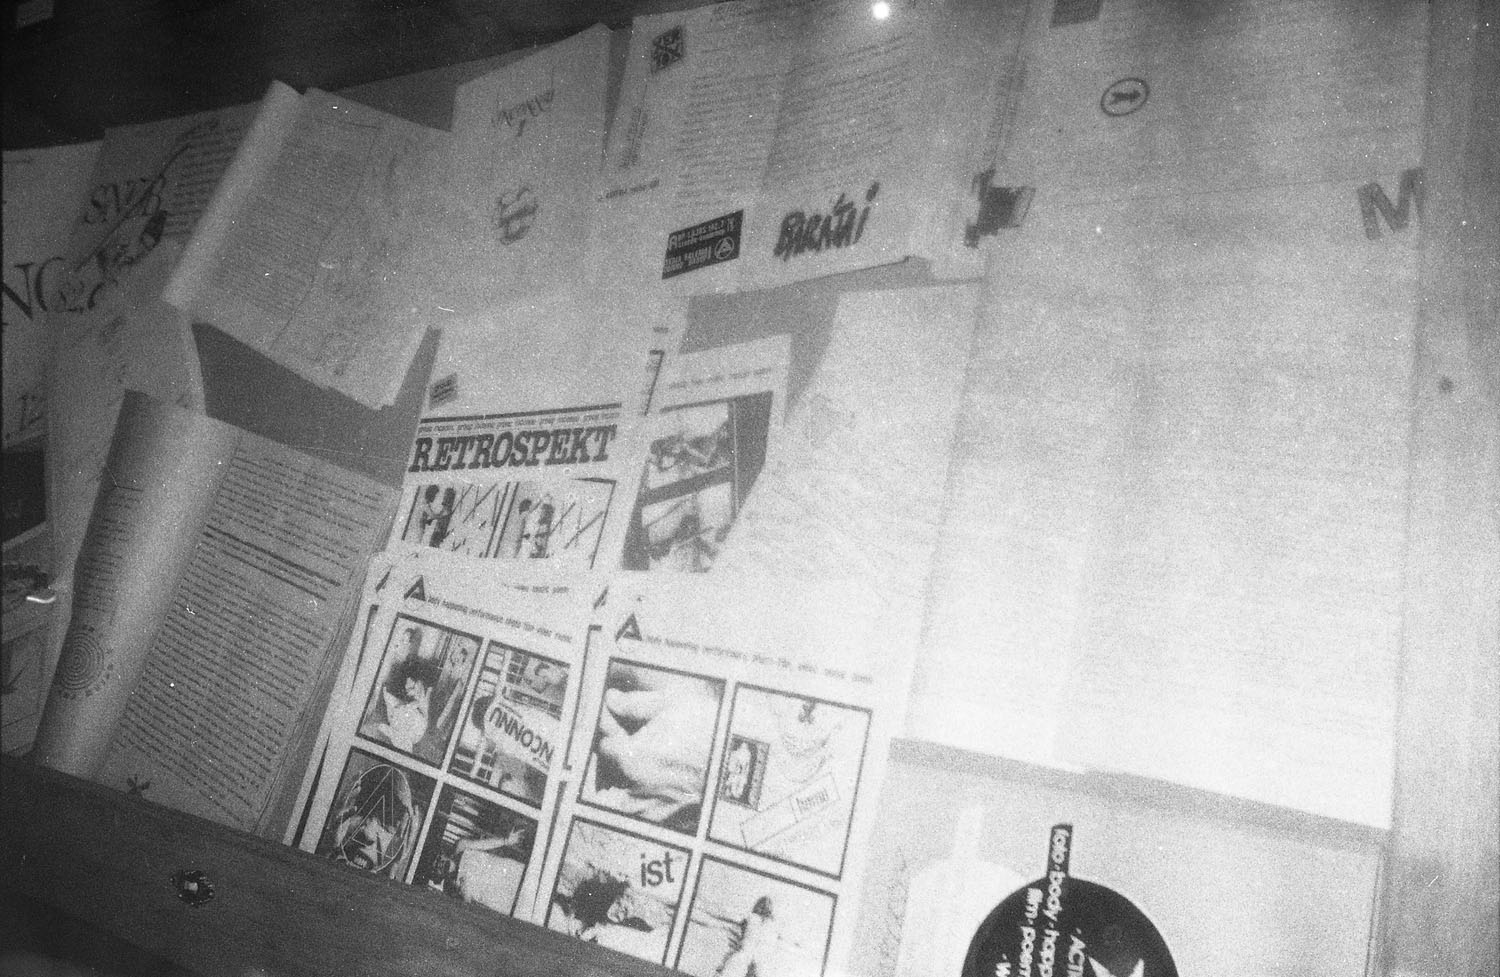 Art samizdats (publications by Inconnu Group) at the exhibition Underground art in the Aczél era, Kossuth Club, Budapest, 1990